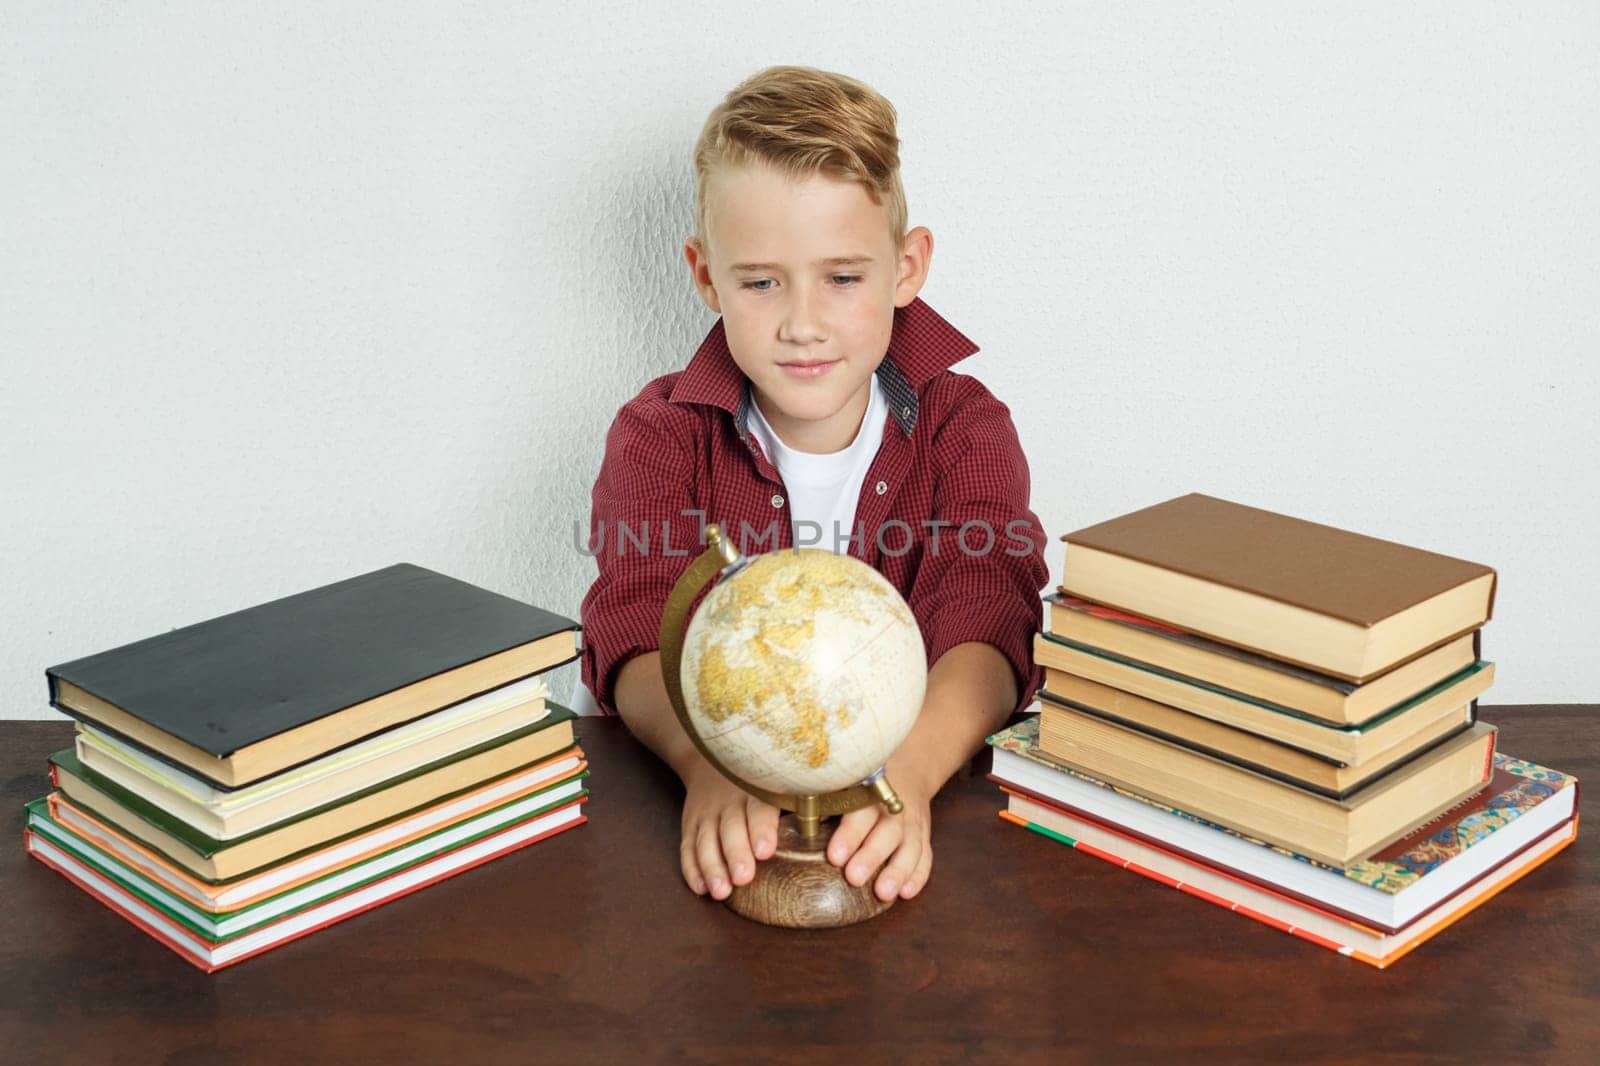 The student sits at the table and looks at the globe holding on to it with his hands. On the table there are books, a globe and an alarm clock. by Sd28DimoN_1976